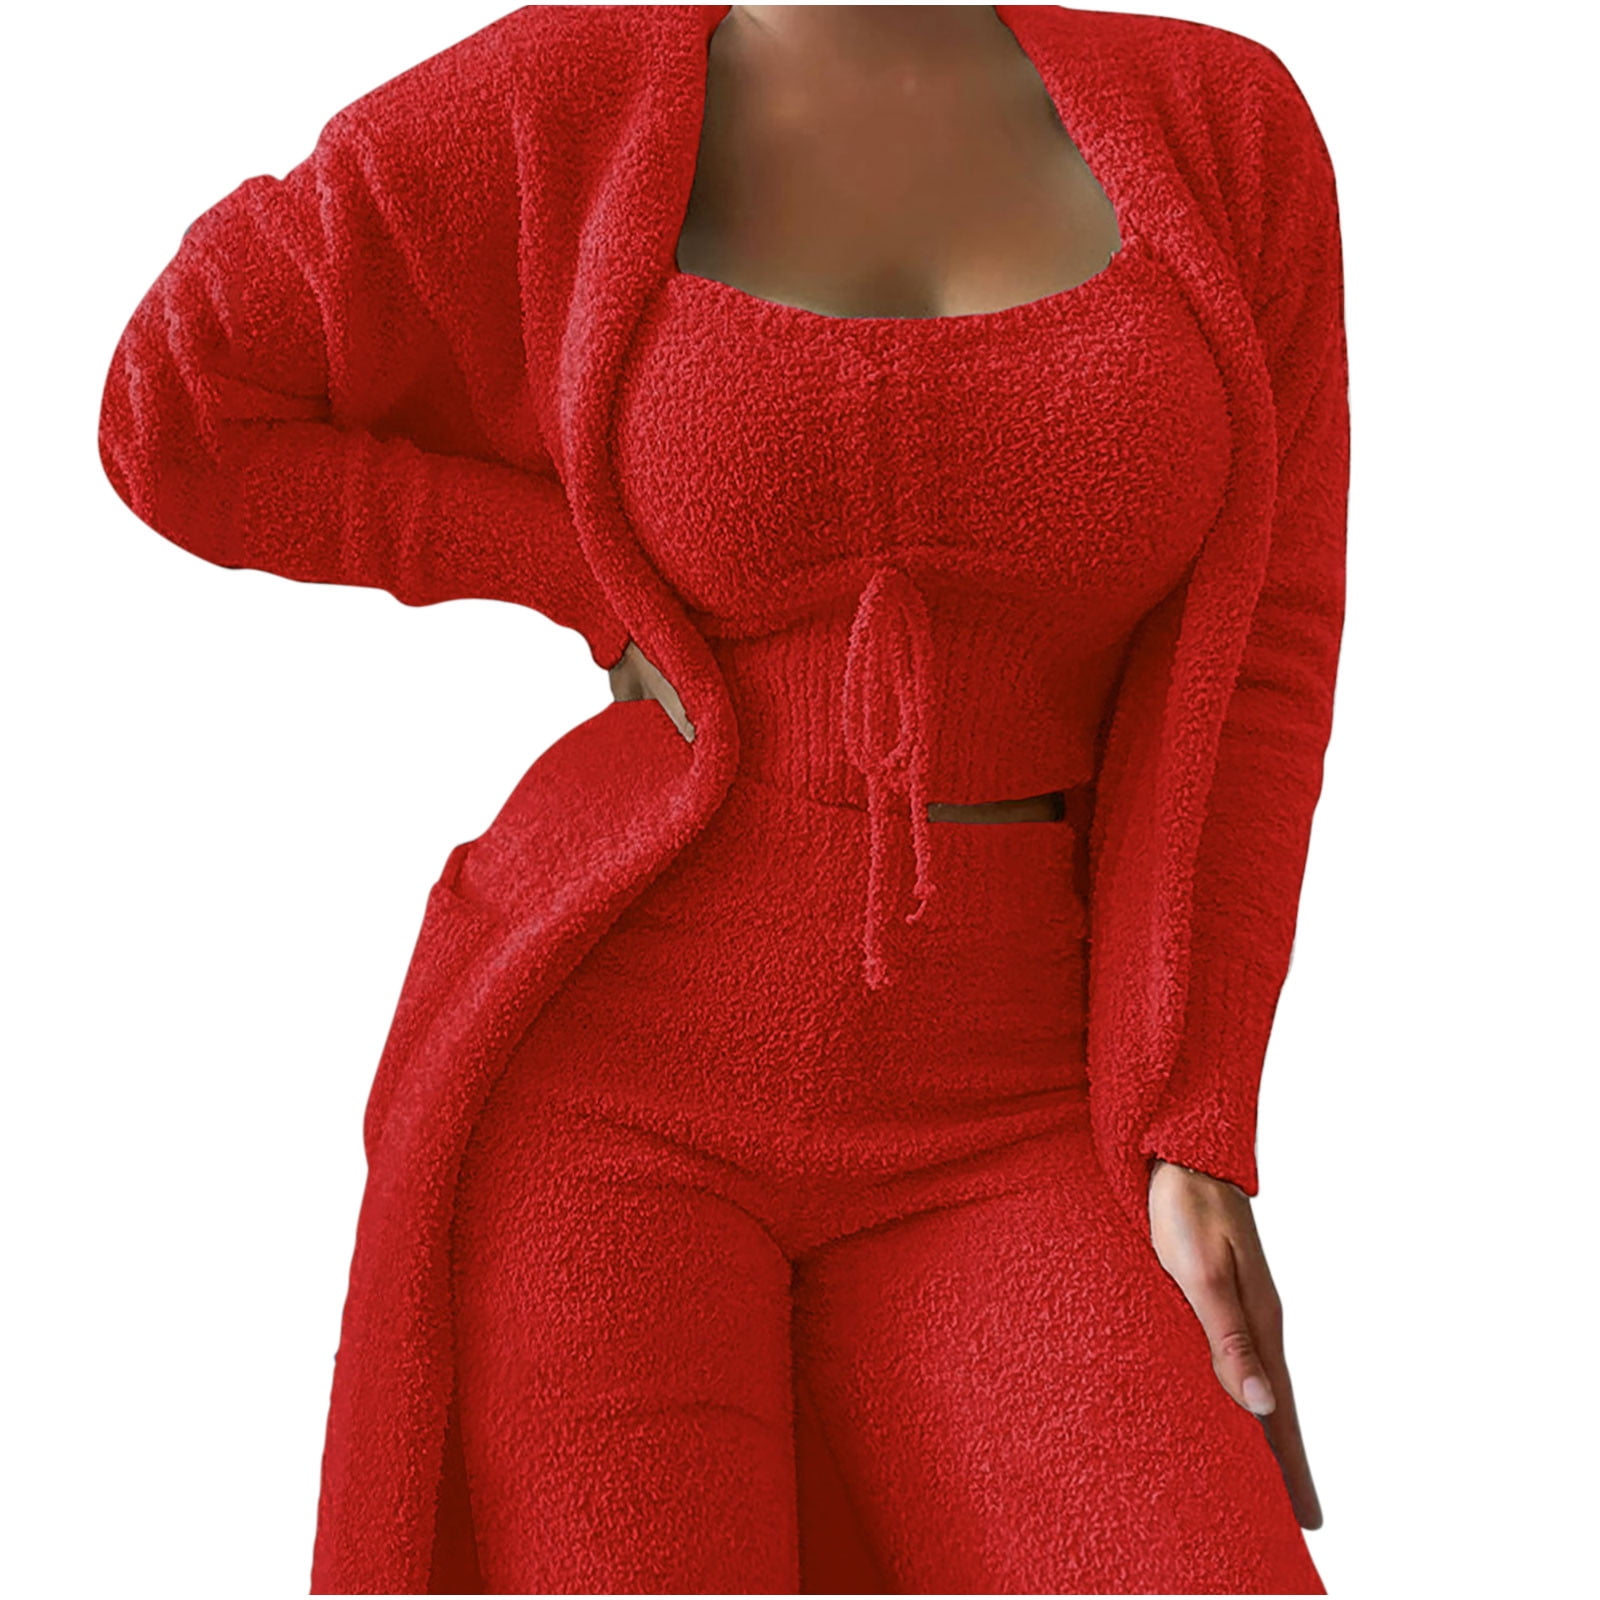 AherBiu Lounge Sets for Women Ribbed Long Sleeve V Neck Pullover